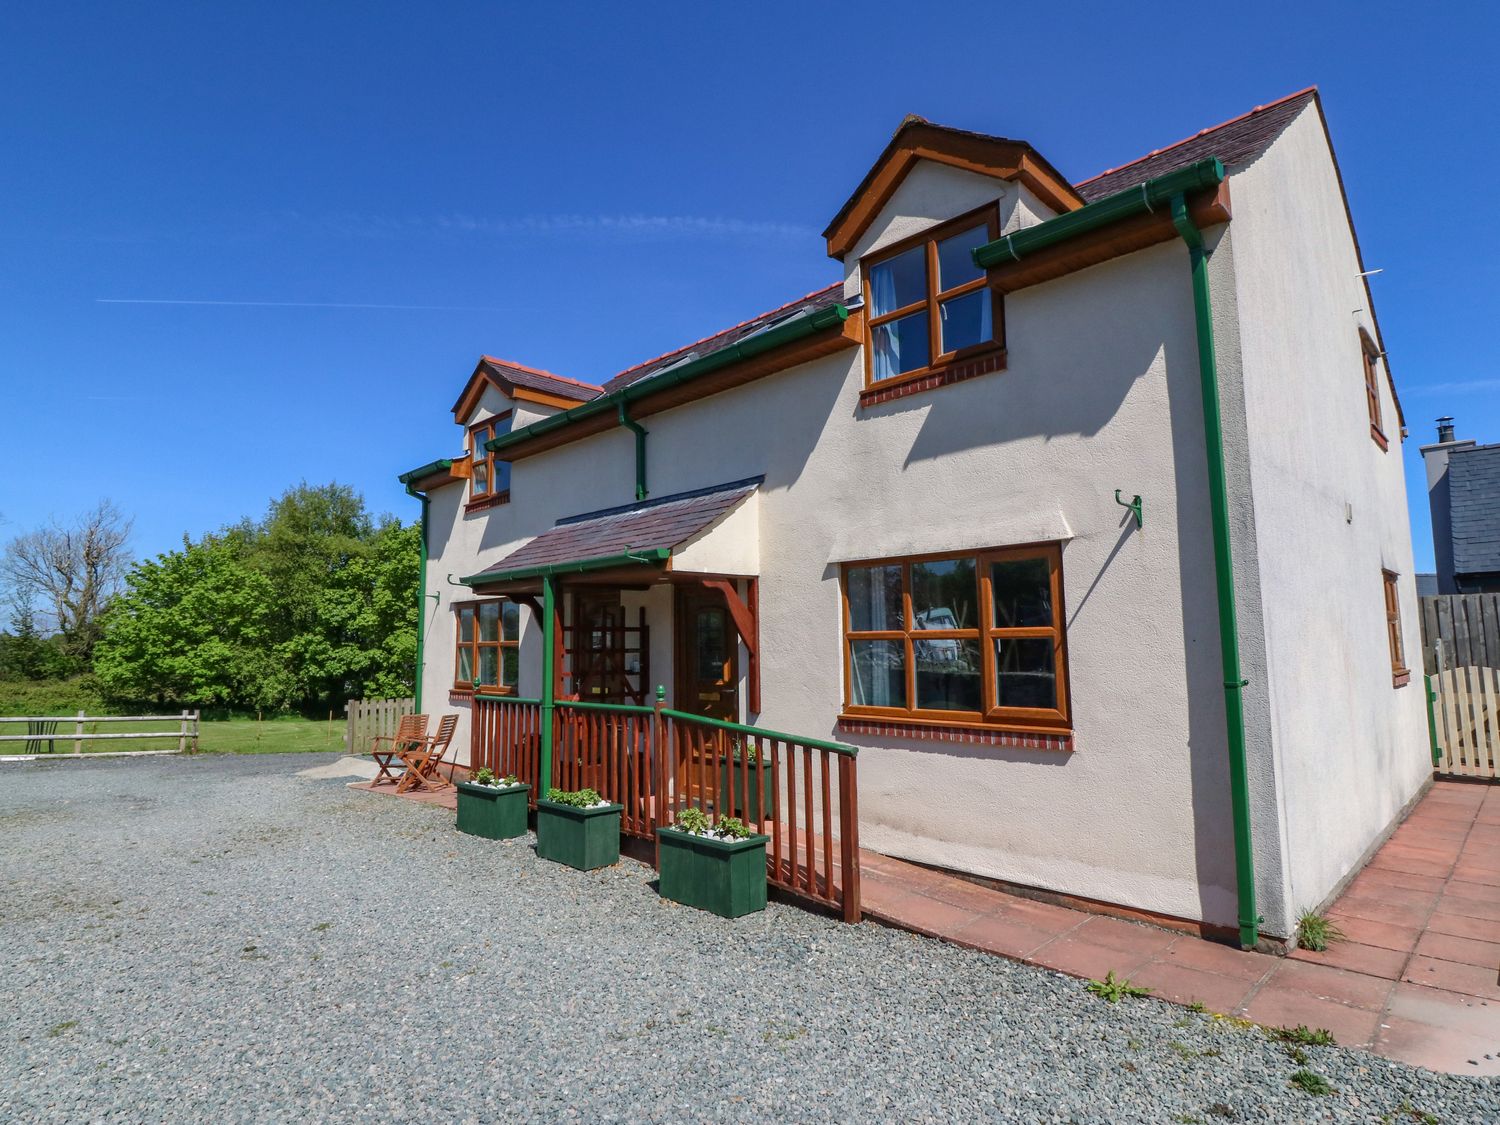 Sycamore Cottage - Anglesey - 4186 - photo 1